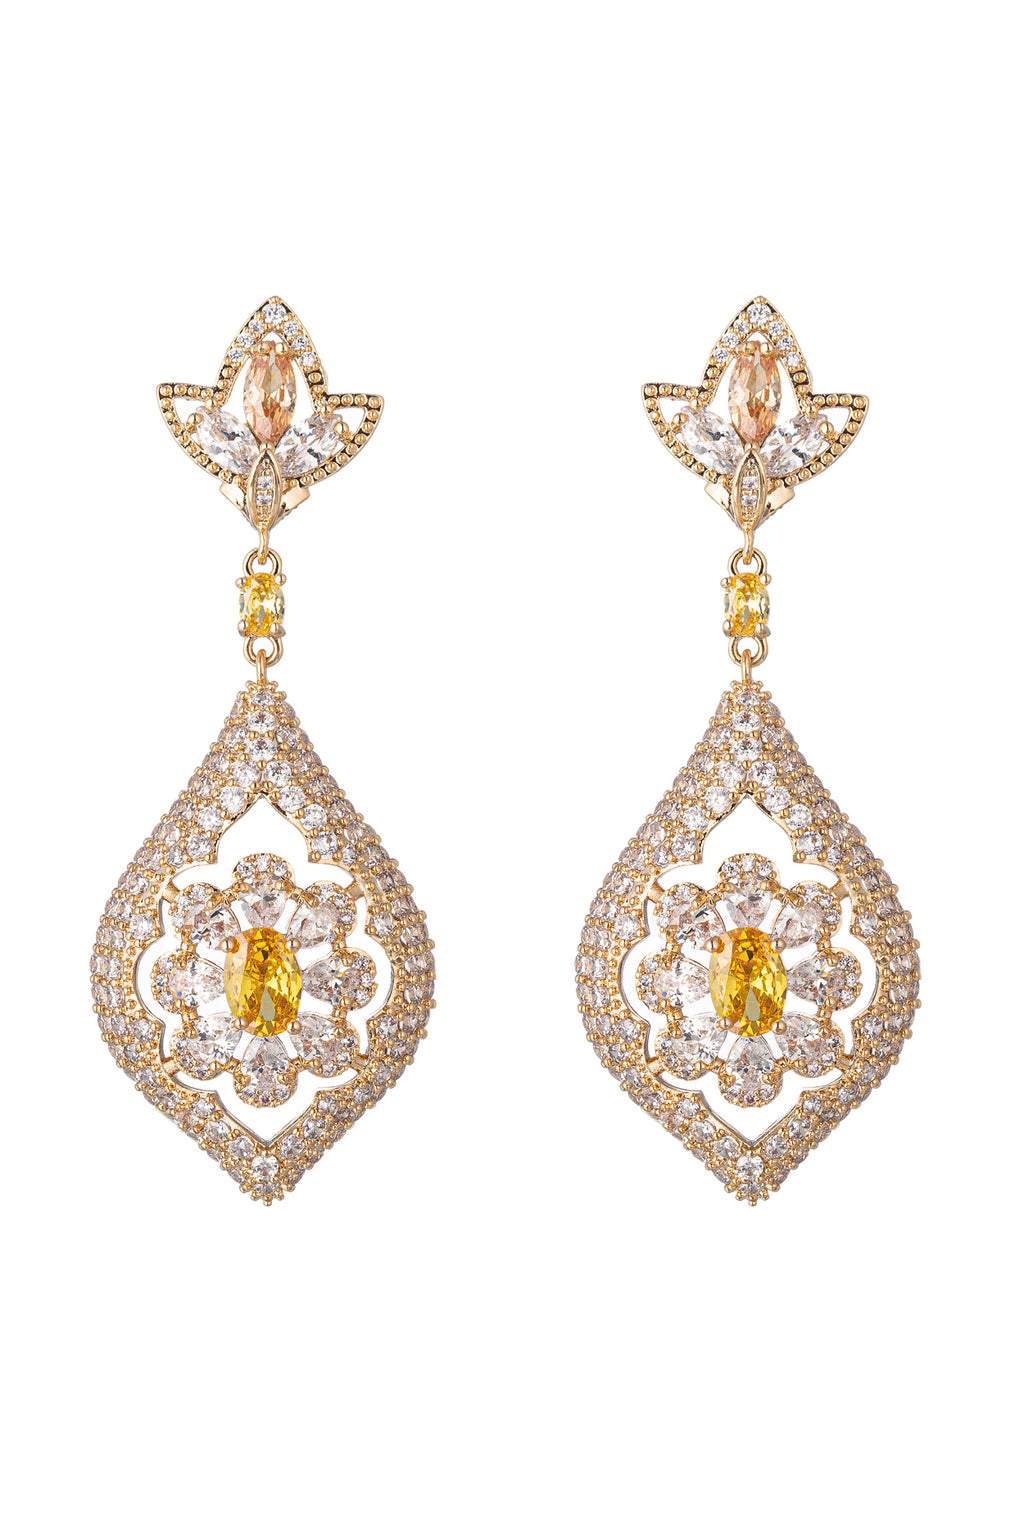 Gold tone brass drop earrings studded with CZ crystals.